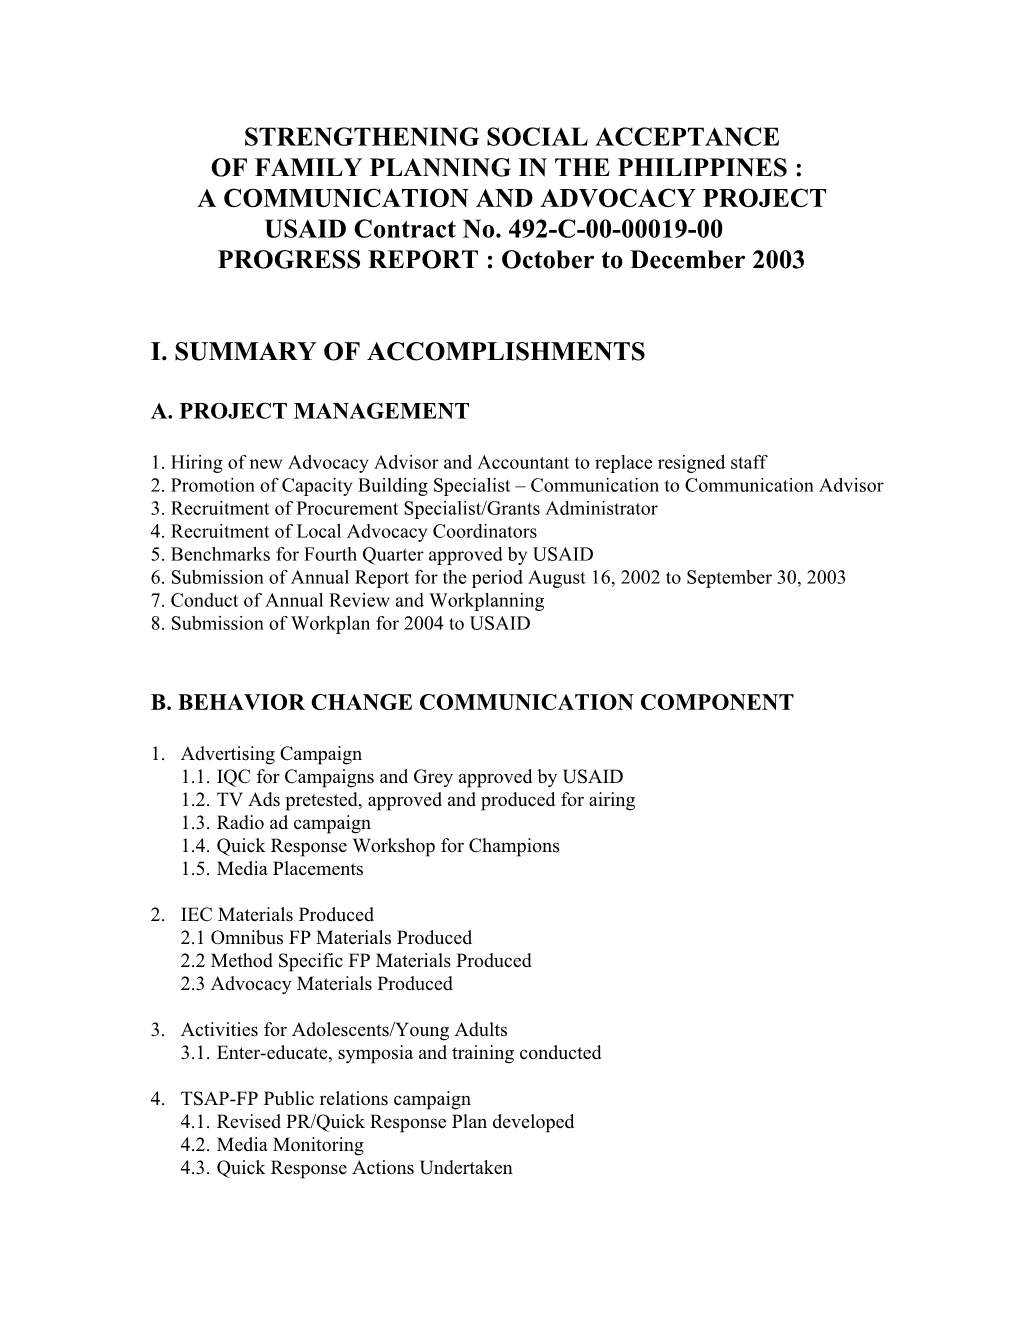 STRENGTHENING SOCIAL ACCEPTANCE of FAMILY PLANNING in the PHILIPPINES : a COMMUNICATION and ADVOCACY PROJECT USAID Contract No